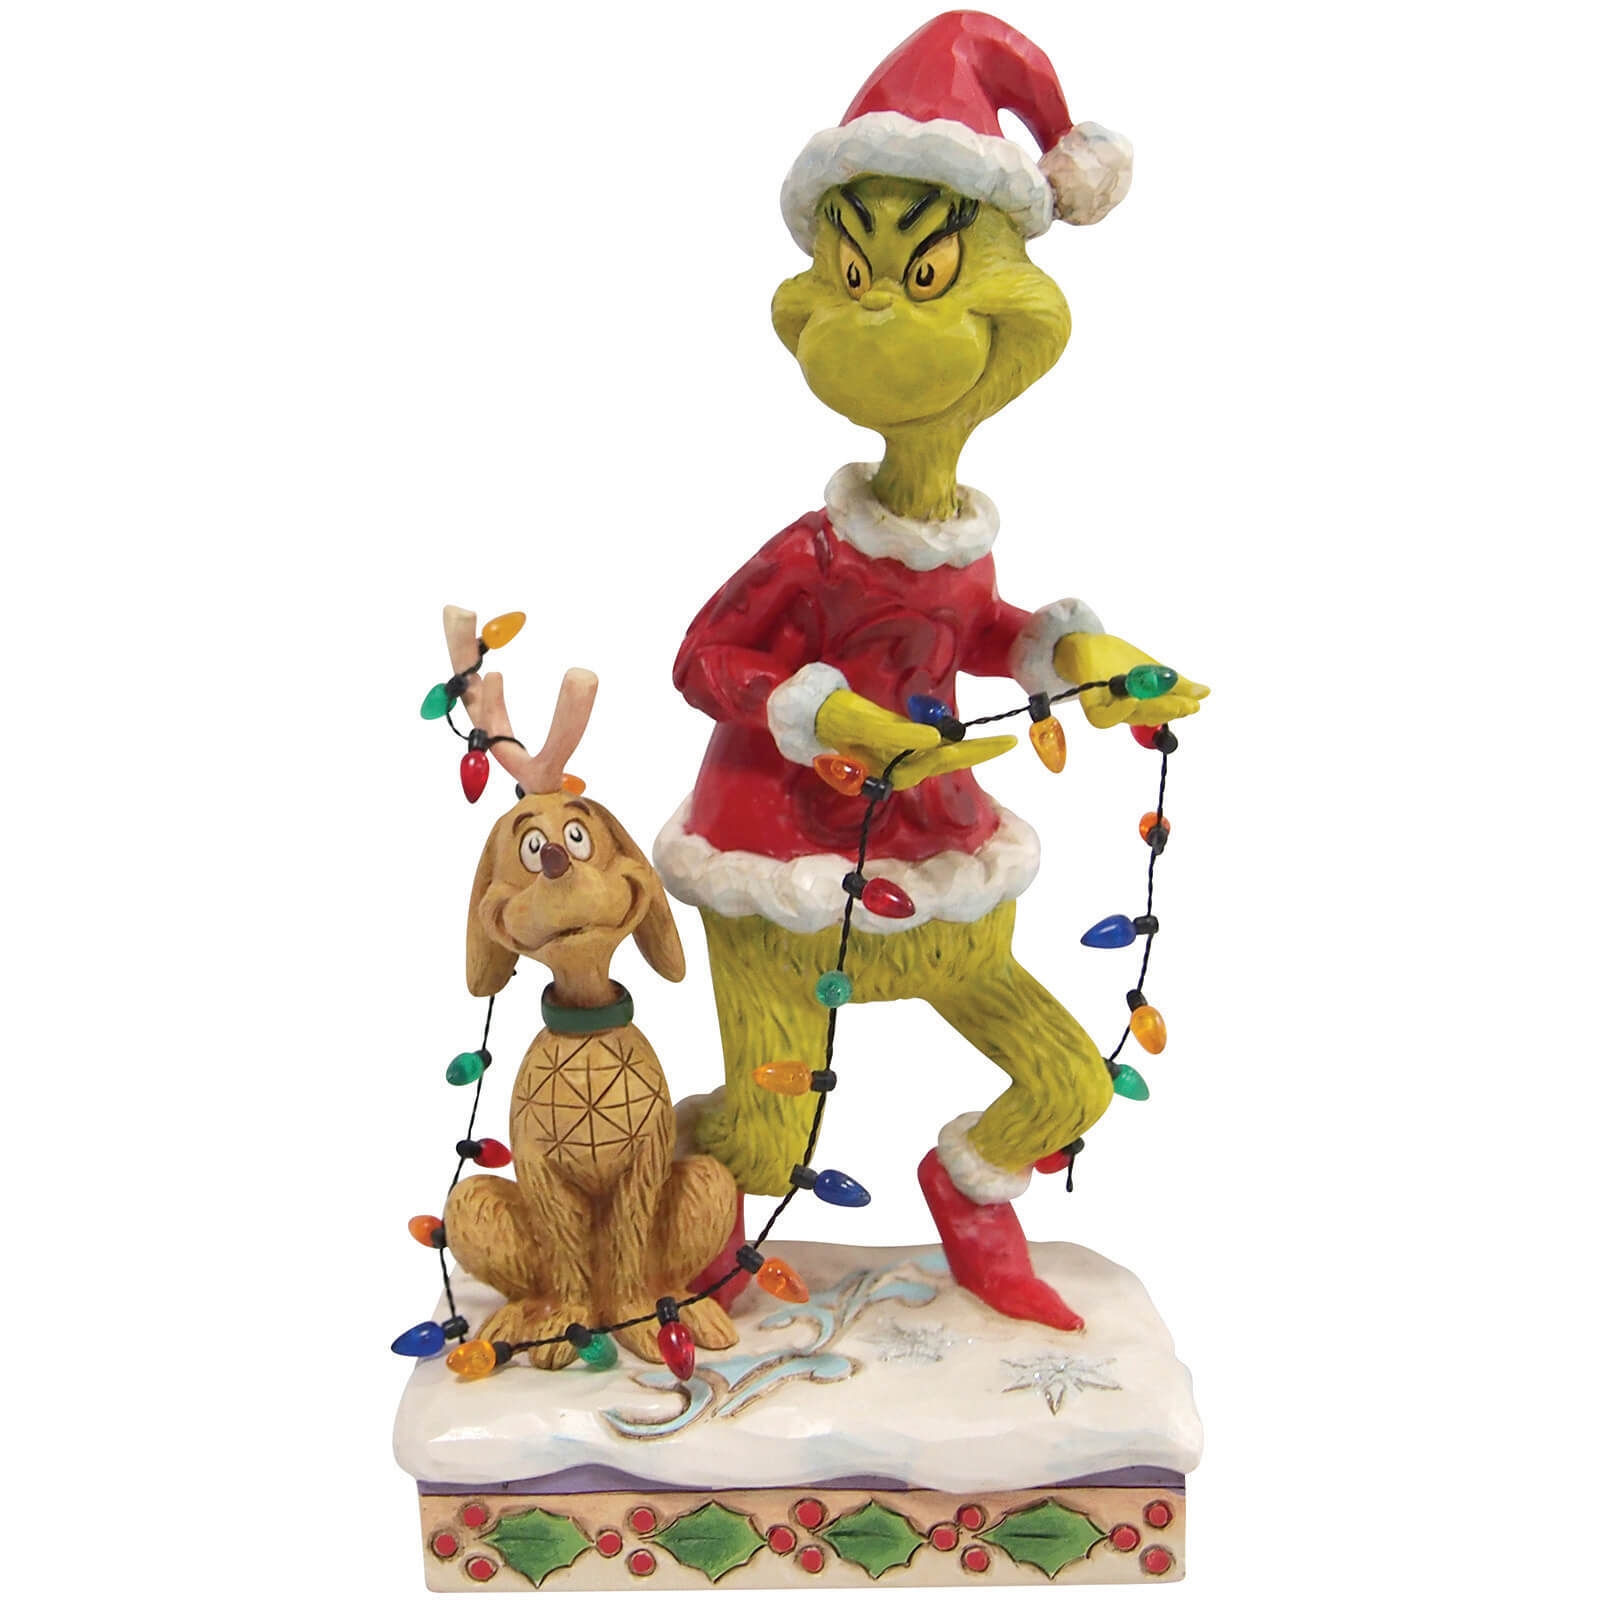 The Grinch Dr.Seuss by Jim Shore Grinch and Max Wrapped in Lights Figurine